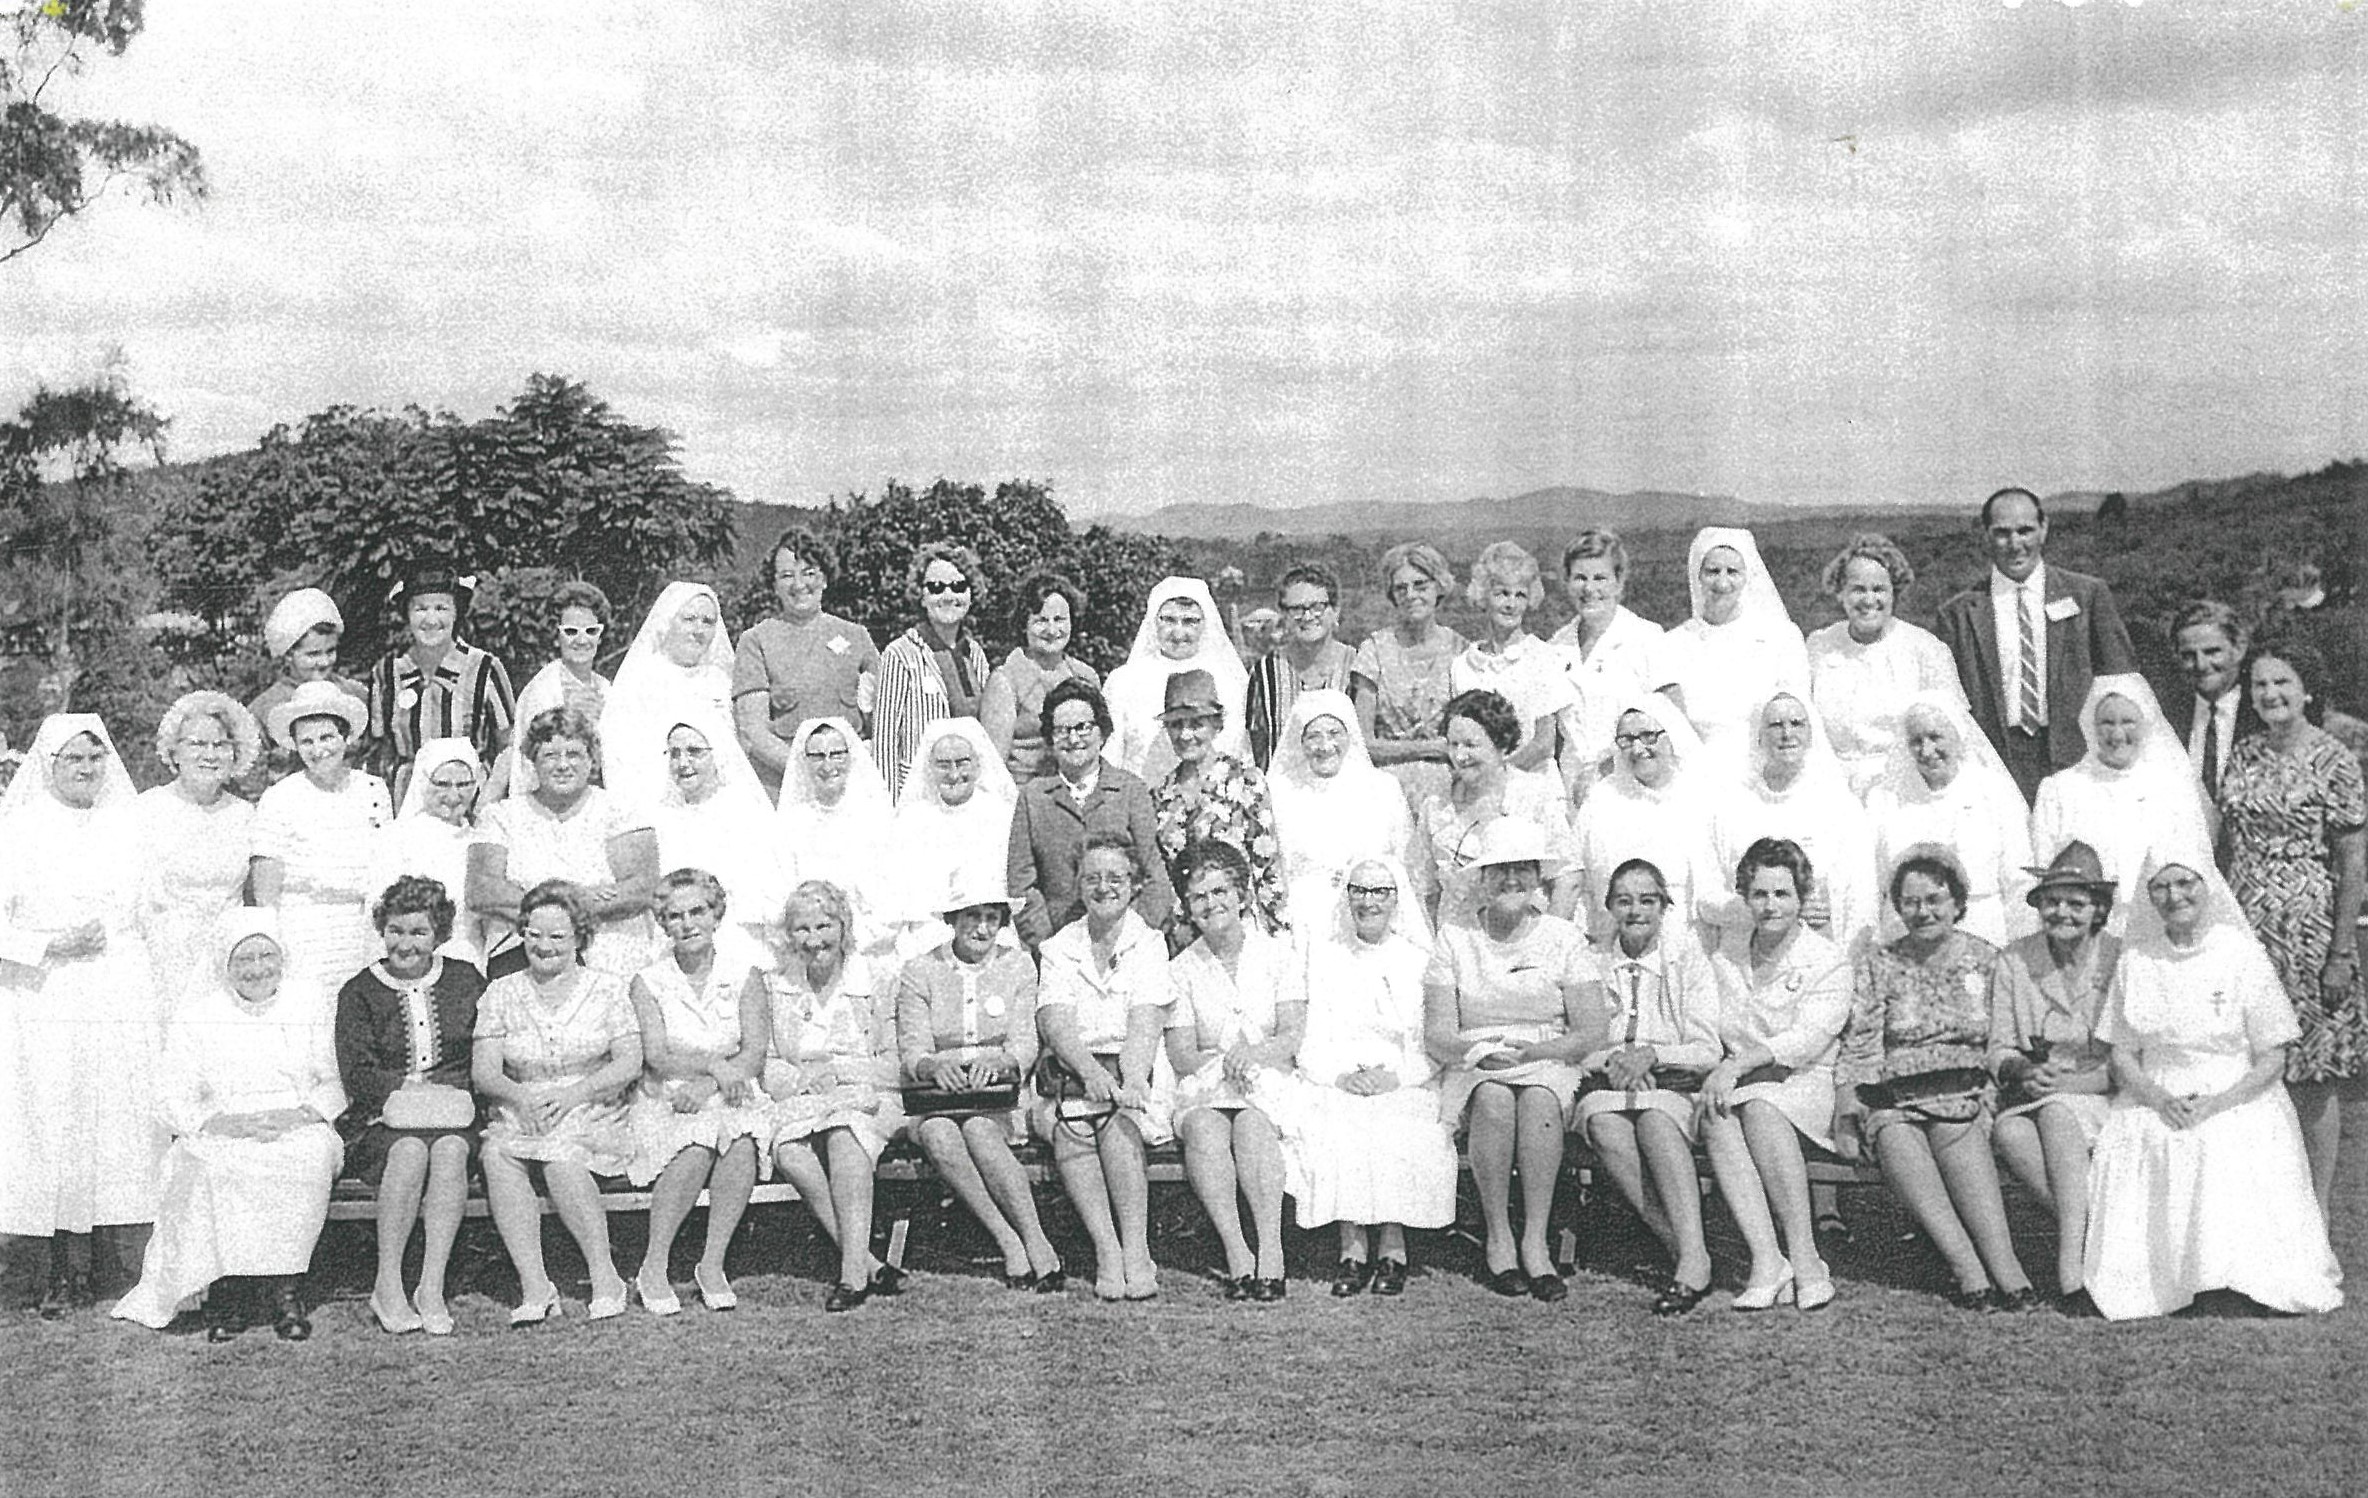 1969 Past Puils Reunion small group